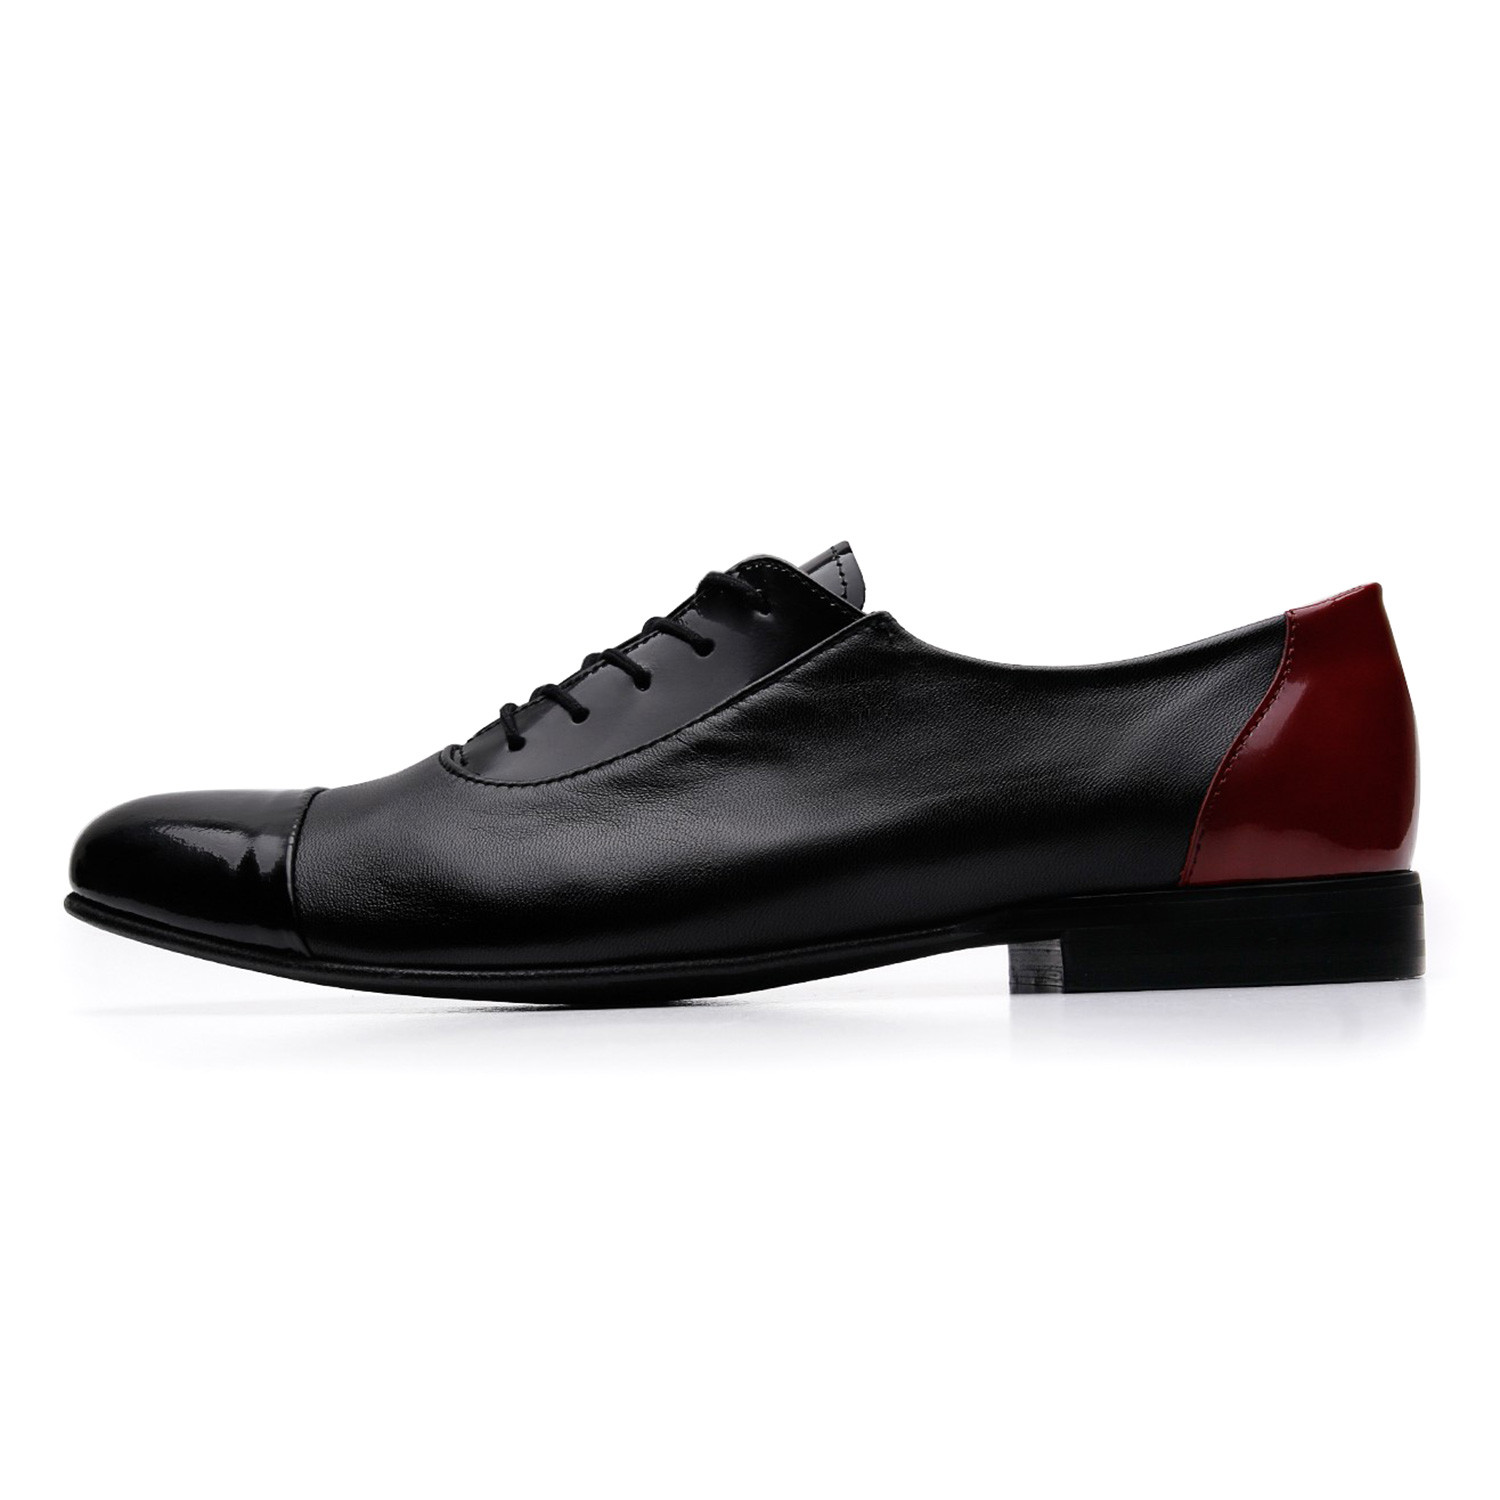 Patent + Smooth Leather Two Tone Oxford // Black (Euro: 40) - MYS Shoes ...